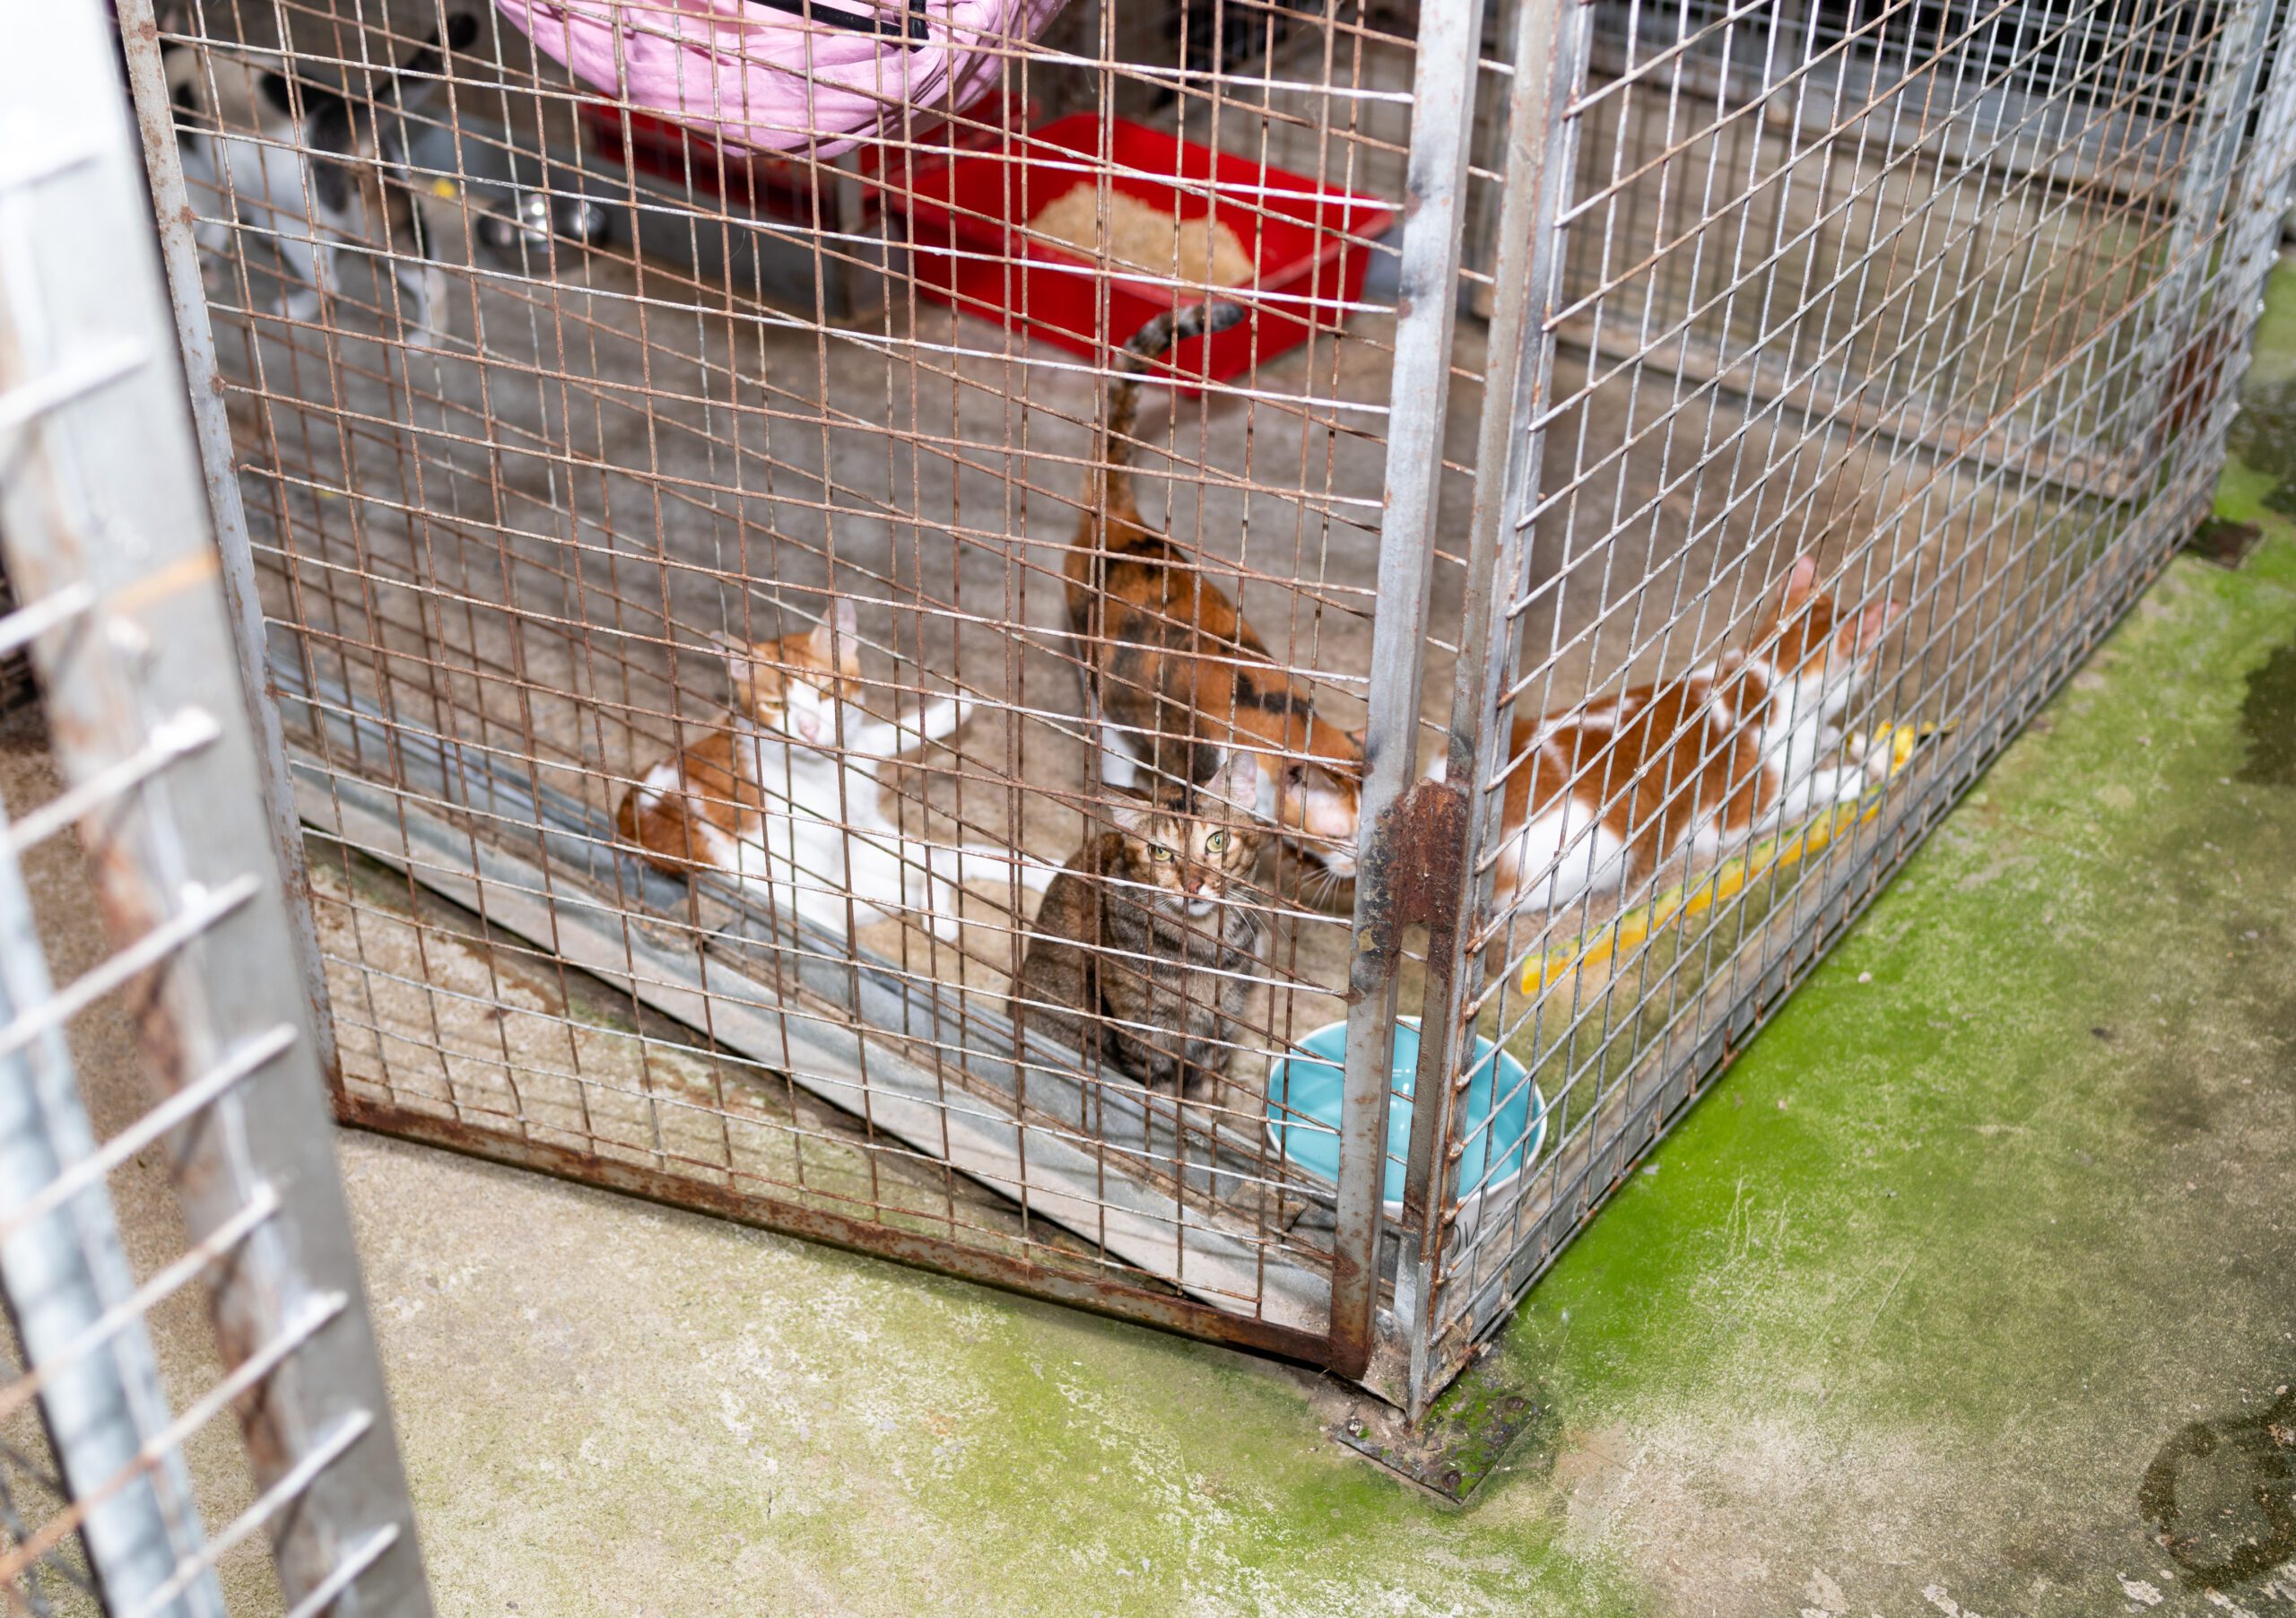 Terry Lim Metta Cats and Dogs Sanctuary Singapore Abused Injured Abandon Animal Shelter -0727